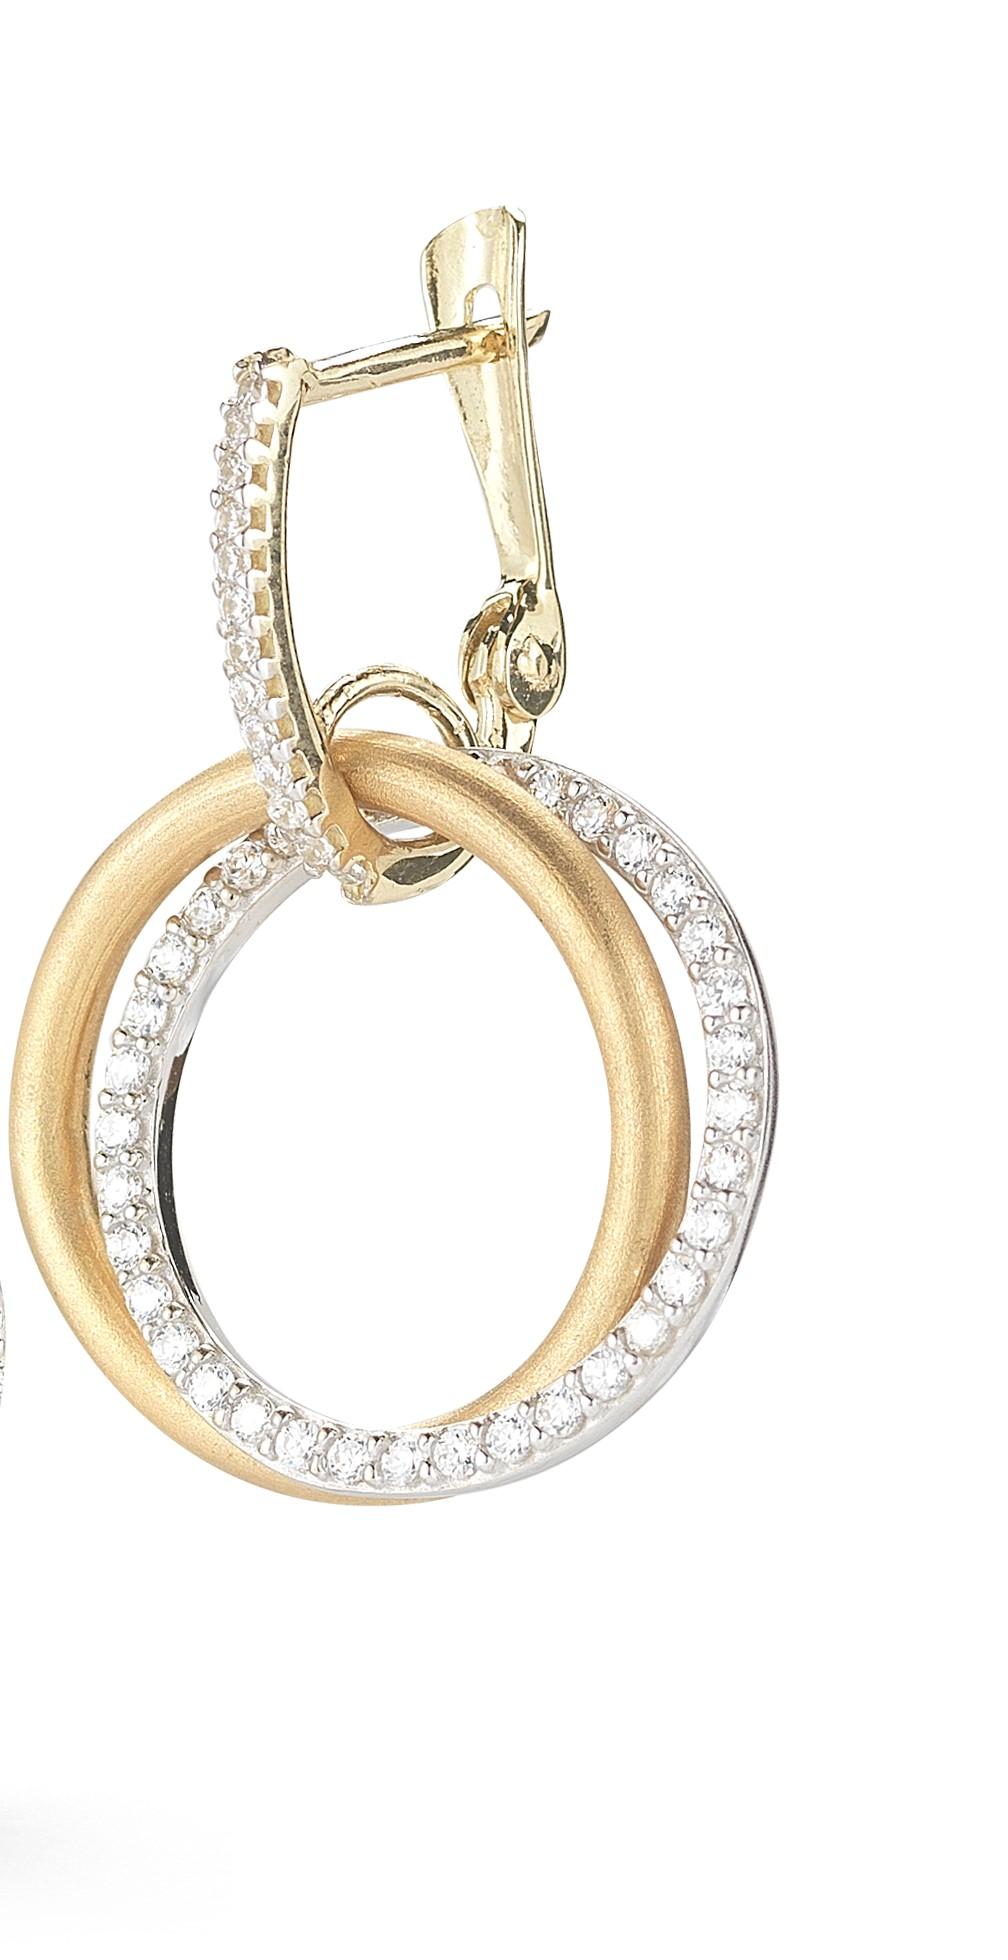 14 Karat Yellow Gold Satin-Finished Interlocking Circle of Love Dangling Earrings, Enhanced with 0.70 Carats of Pave Set Diamonds on a Leverback.
